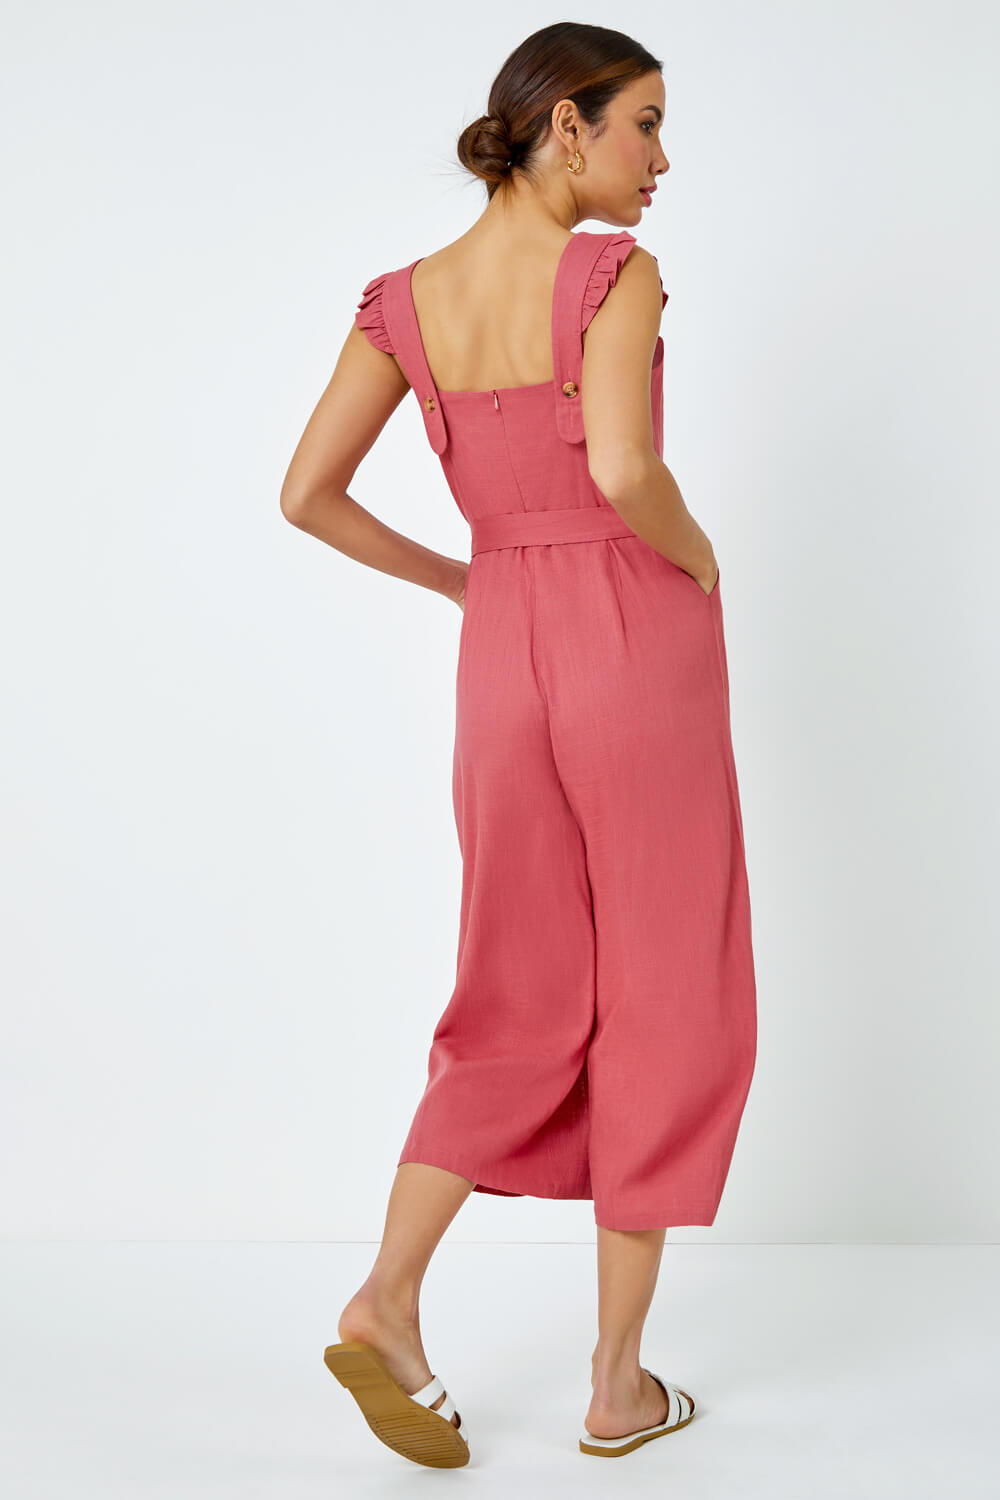 PINK Linen Blend Cropped Frill Jumpsuit, Image 3 of 5